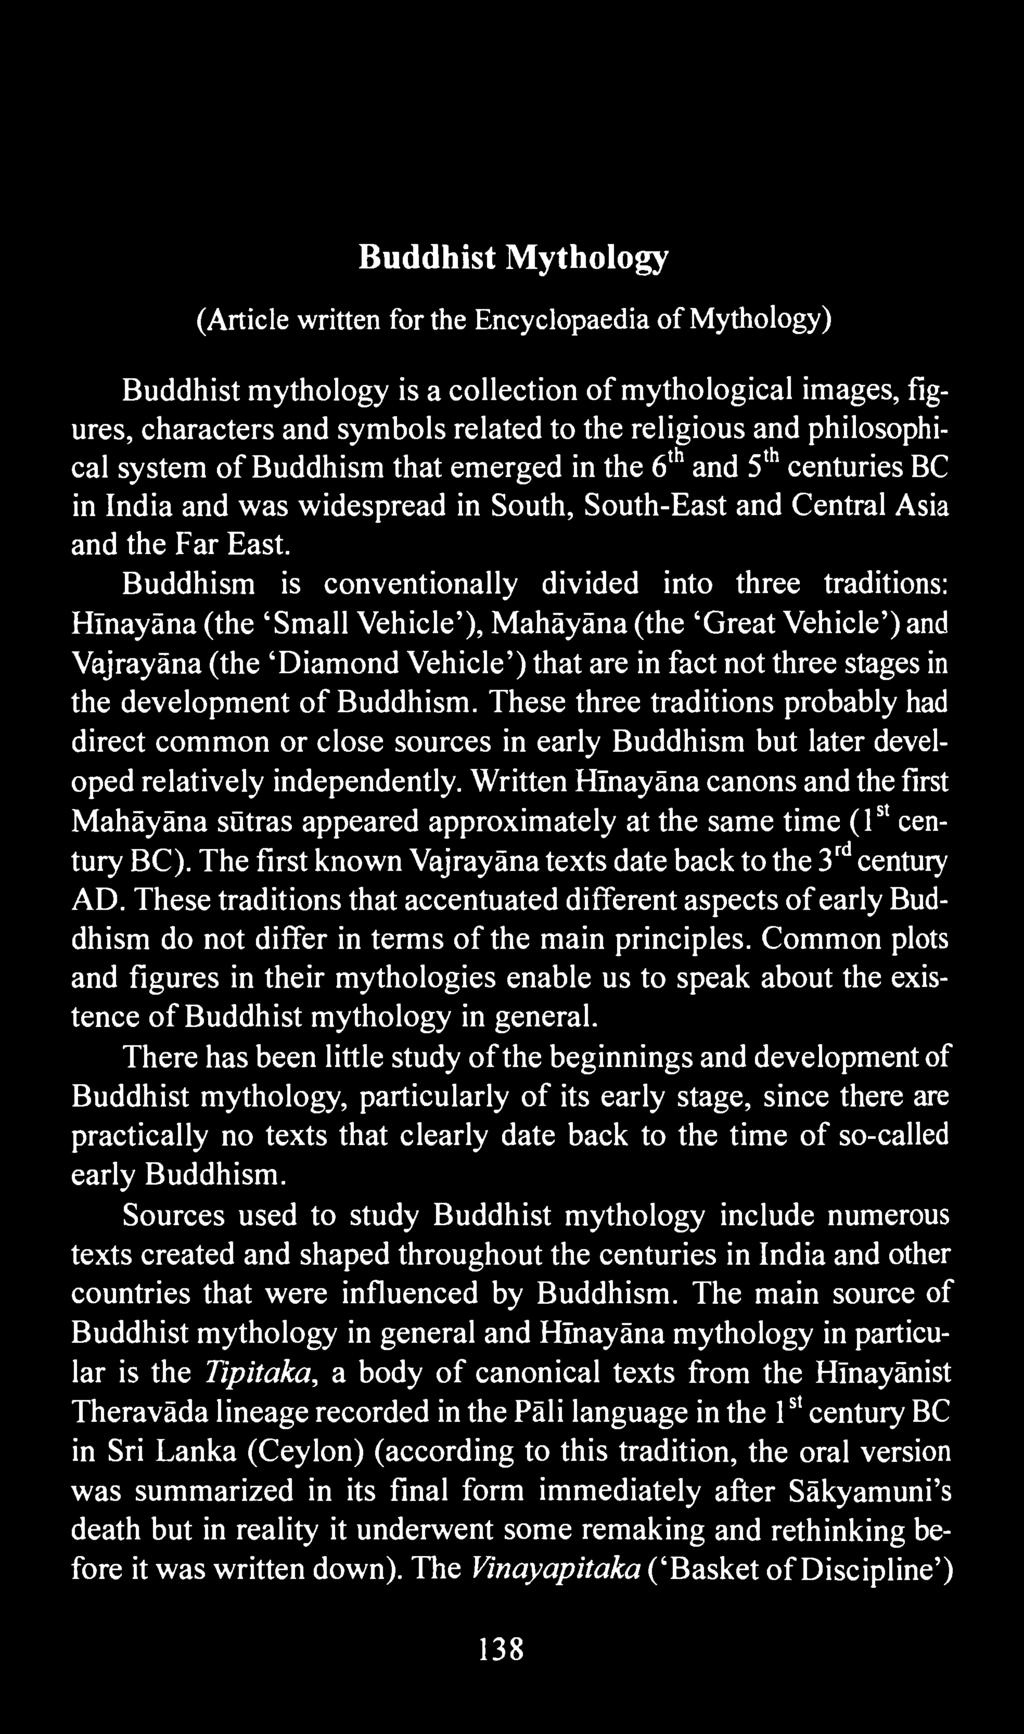 Buddhism is conventionally divided into three traditions: Hlnayäna (the 'Small Vehicle'), Mahäyäna (the 'Great Vehicle') and Vajrayäna (the 'Diamond Vehicle') that are in fact not three stages in the